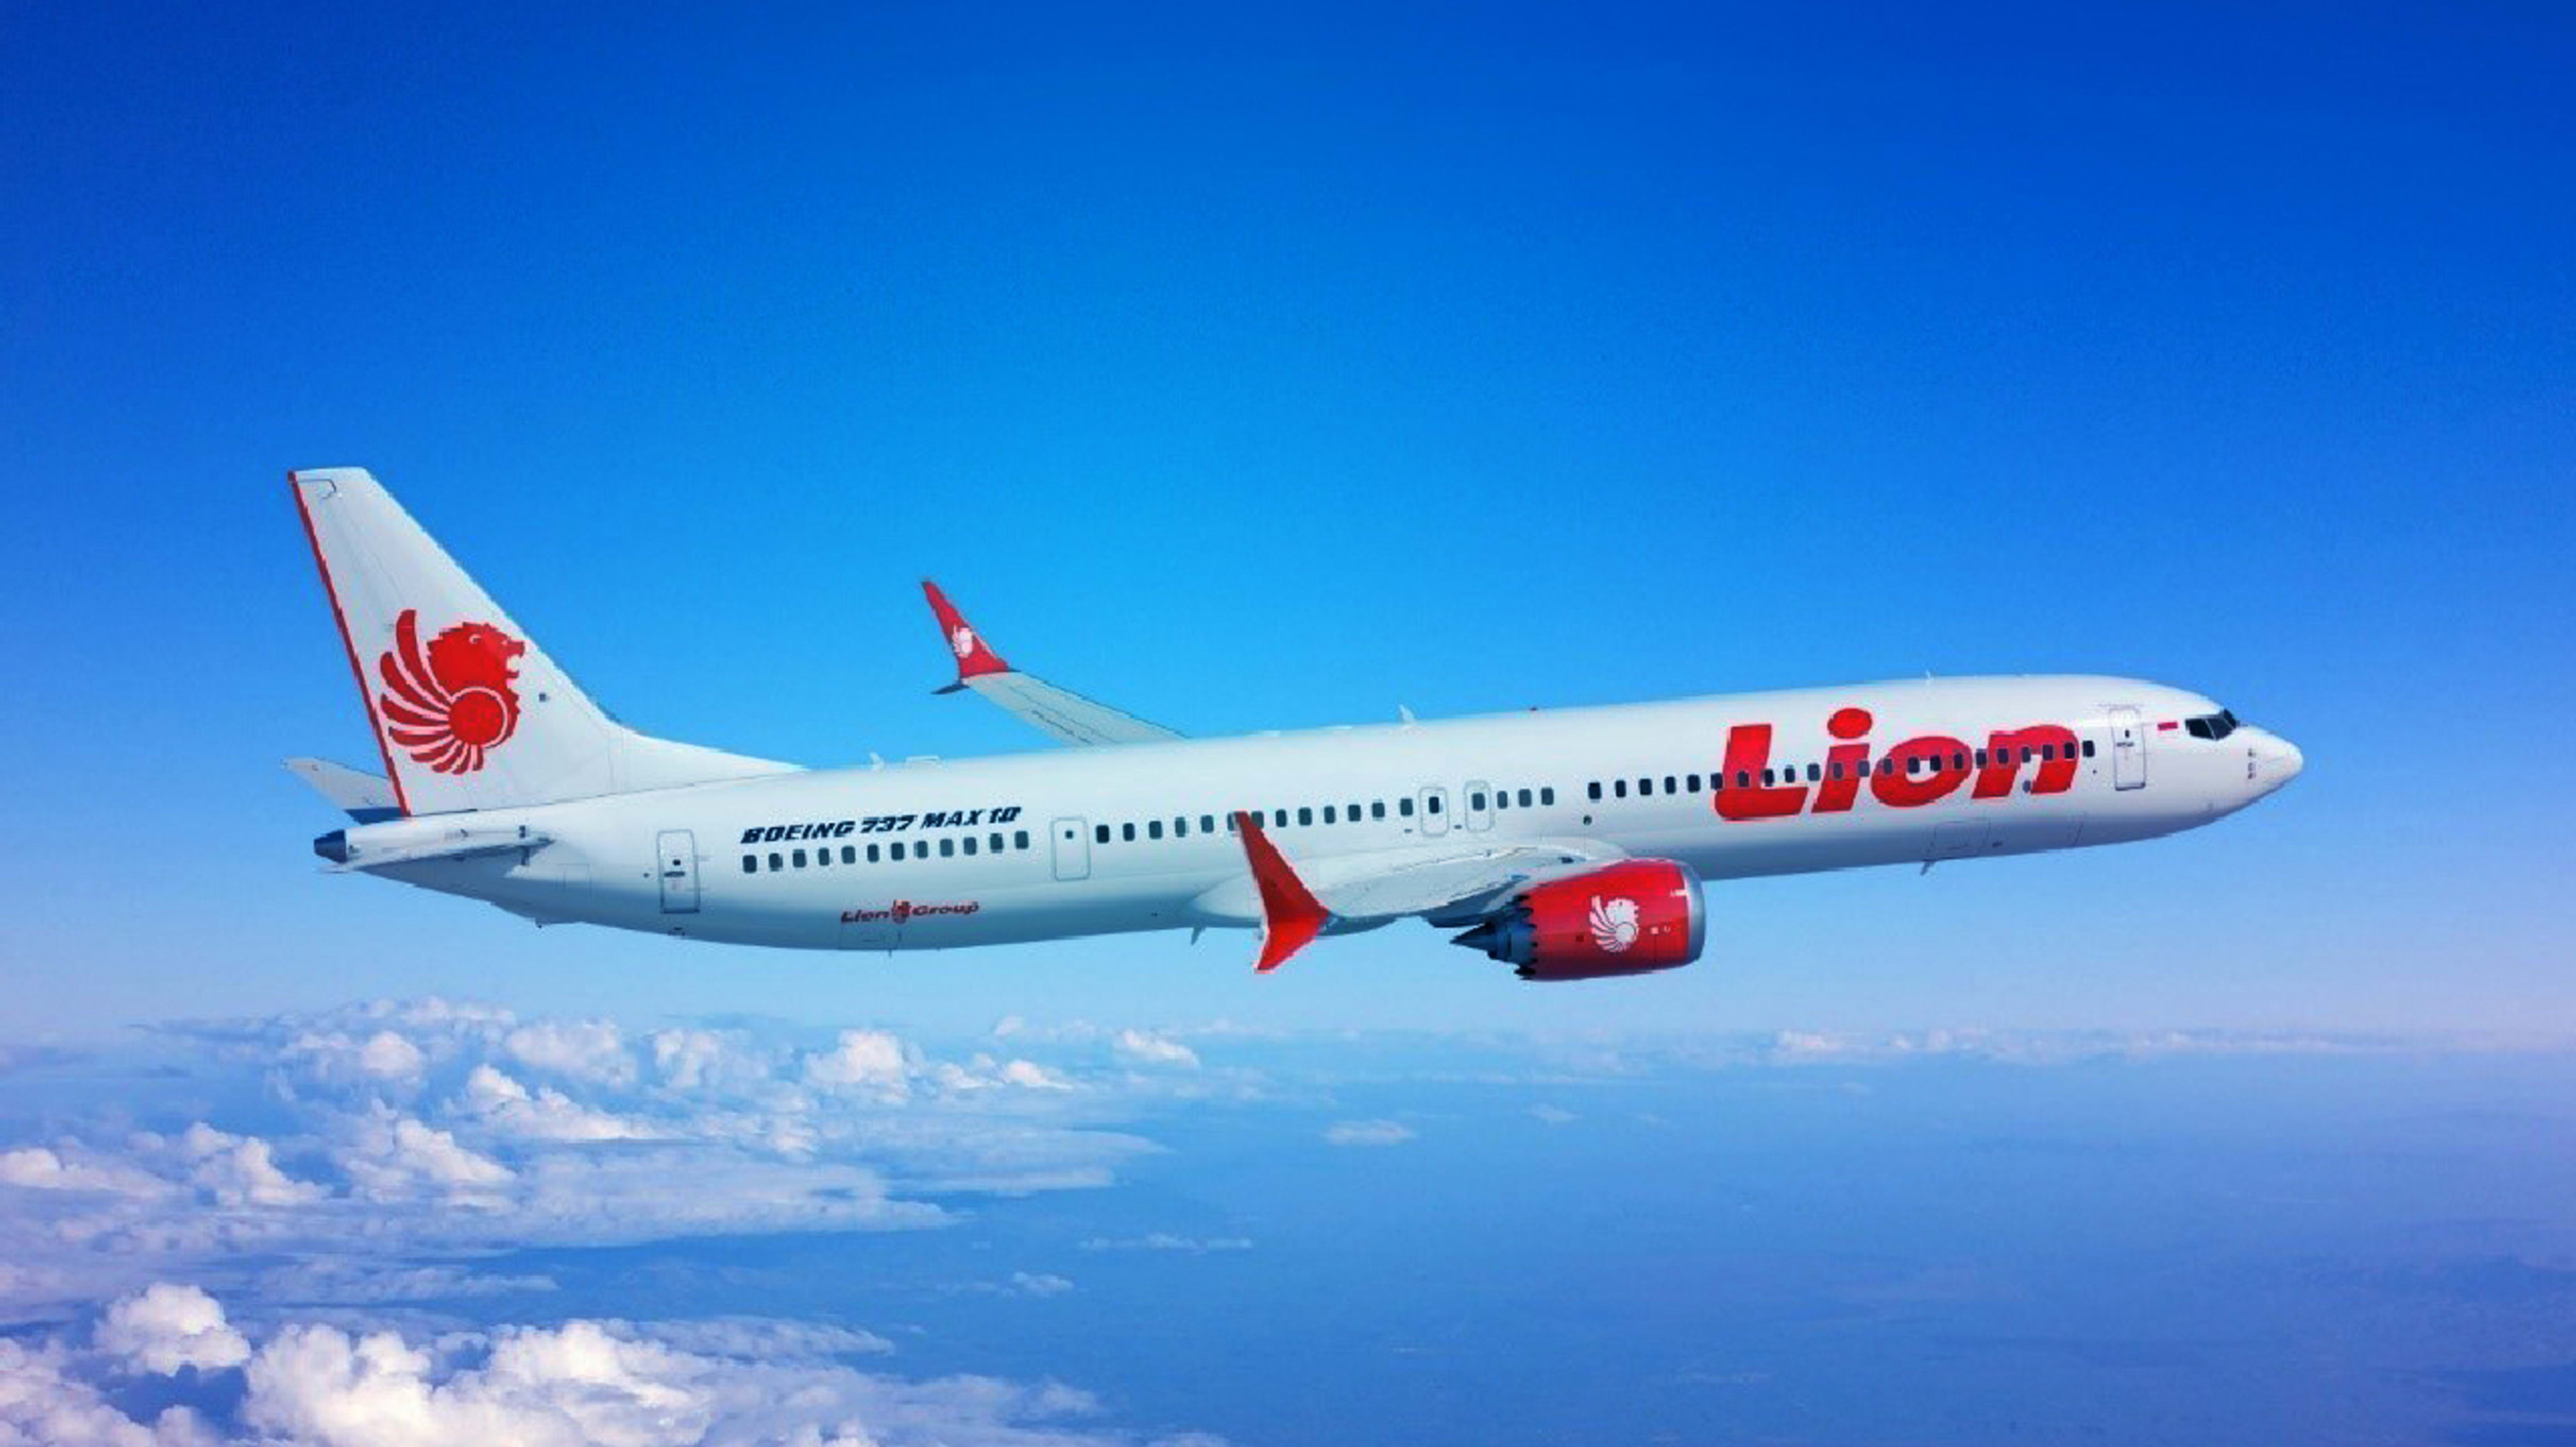 Boeing issues a warning about 737 MAX planes in the wake of the Lion Air crash